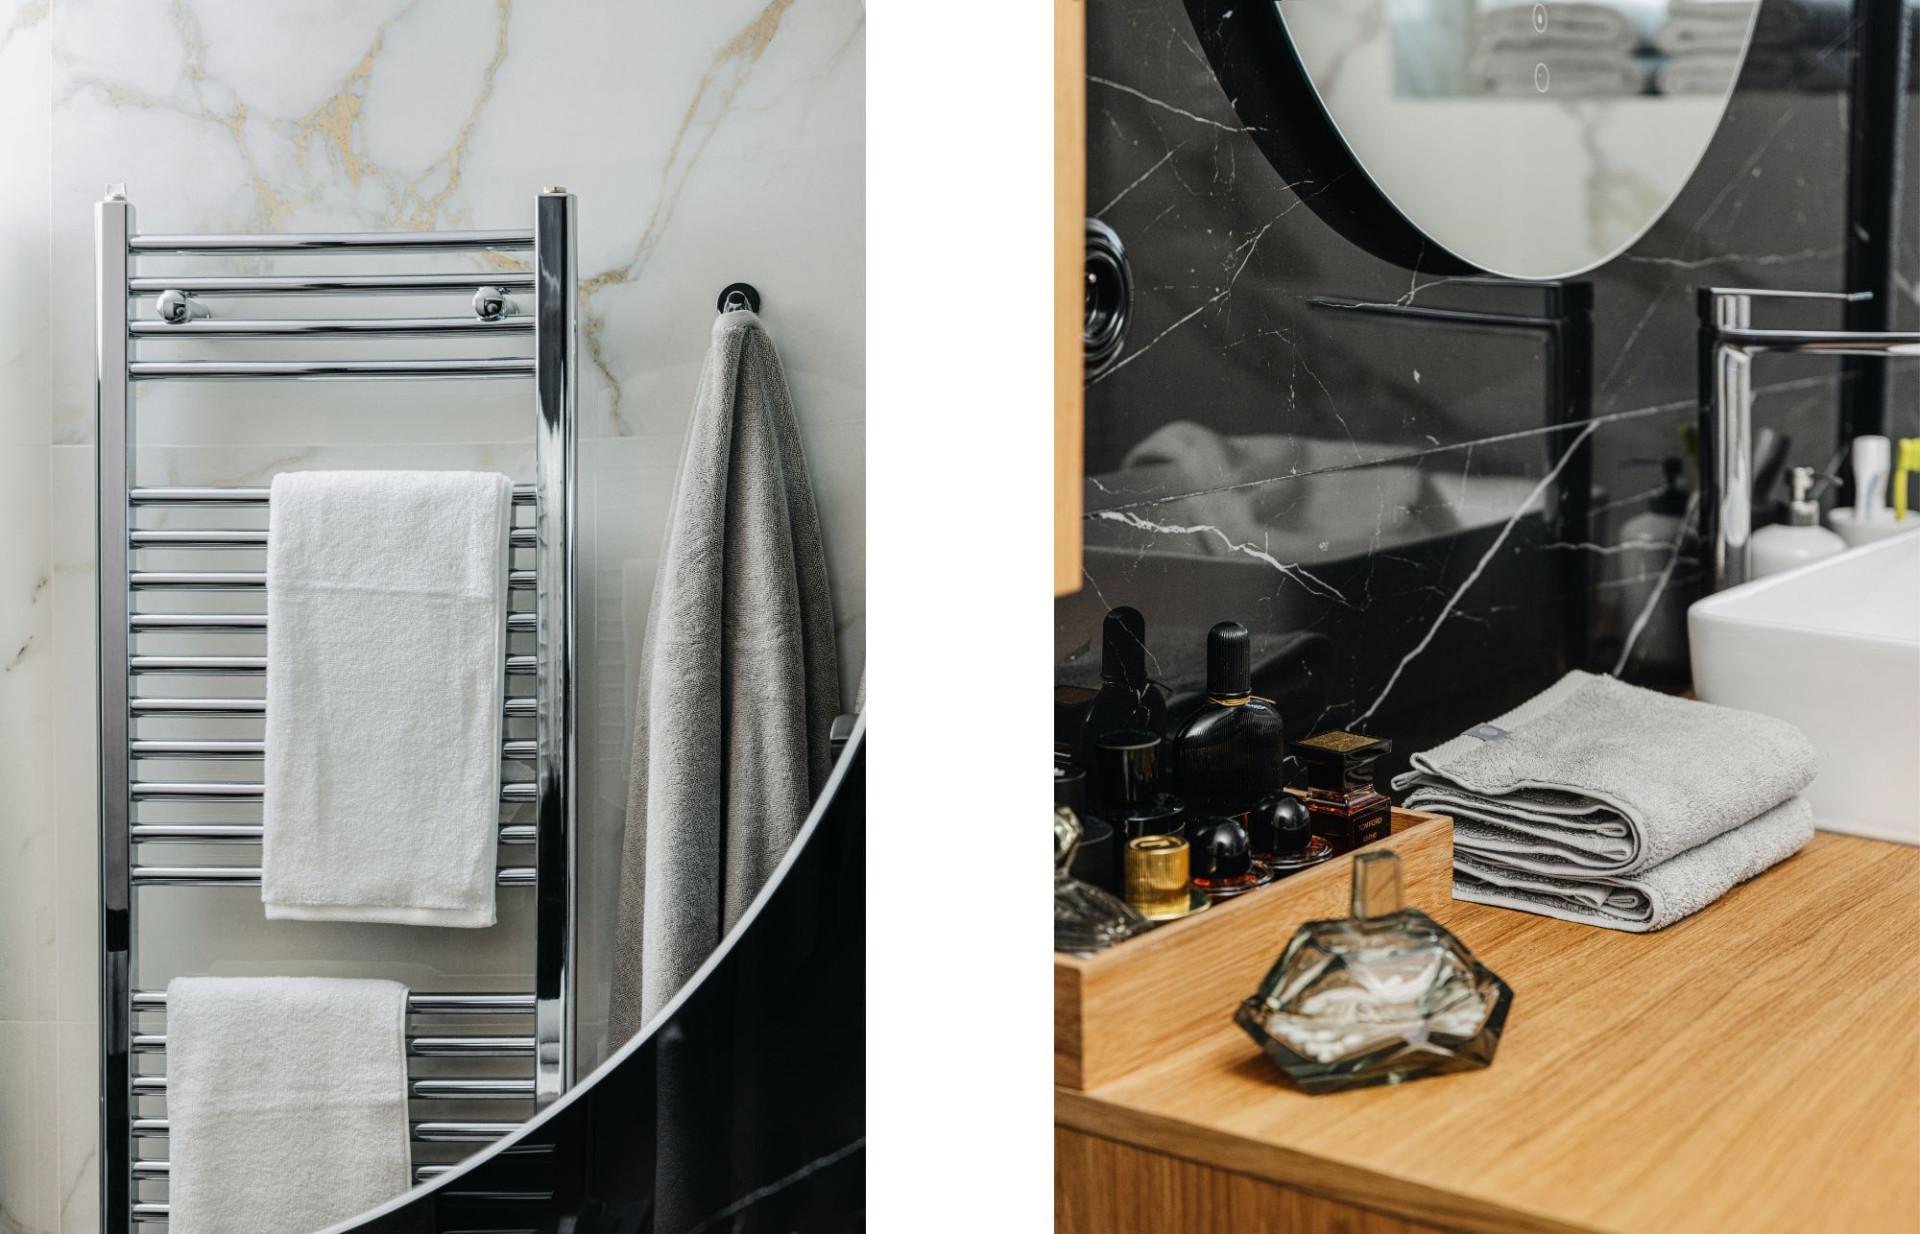 The bathroom features a minimalist style along with Lejaan Delicate Cotton towels.